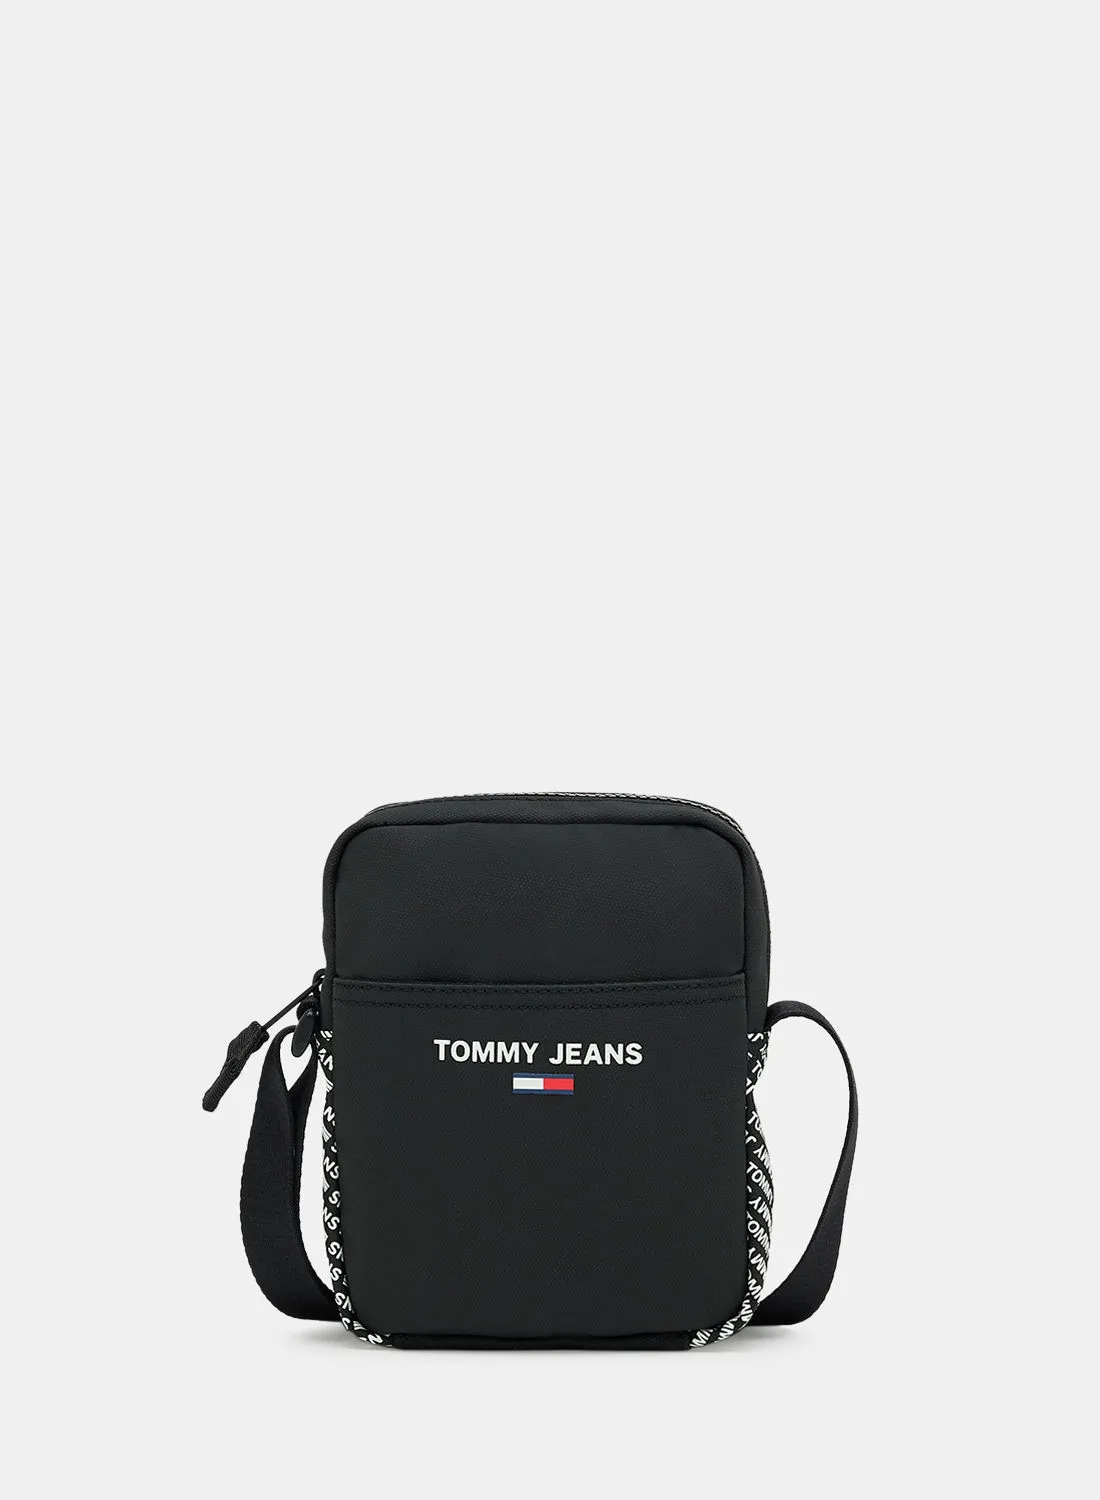 TOMMY JEANS Essential Reporter Bag